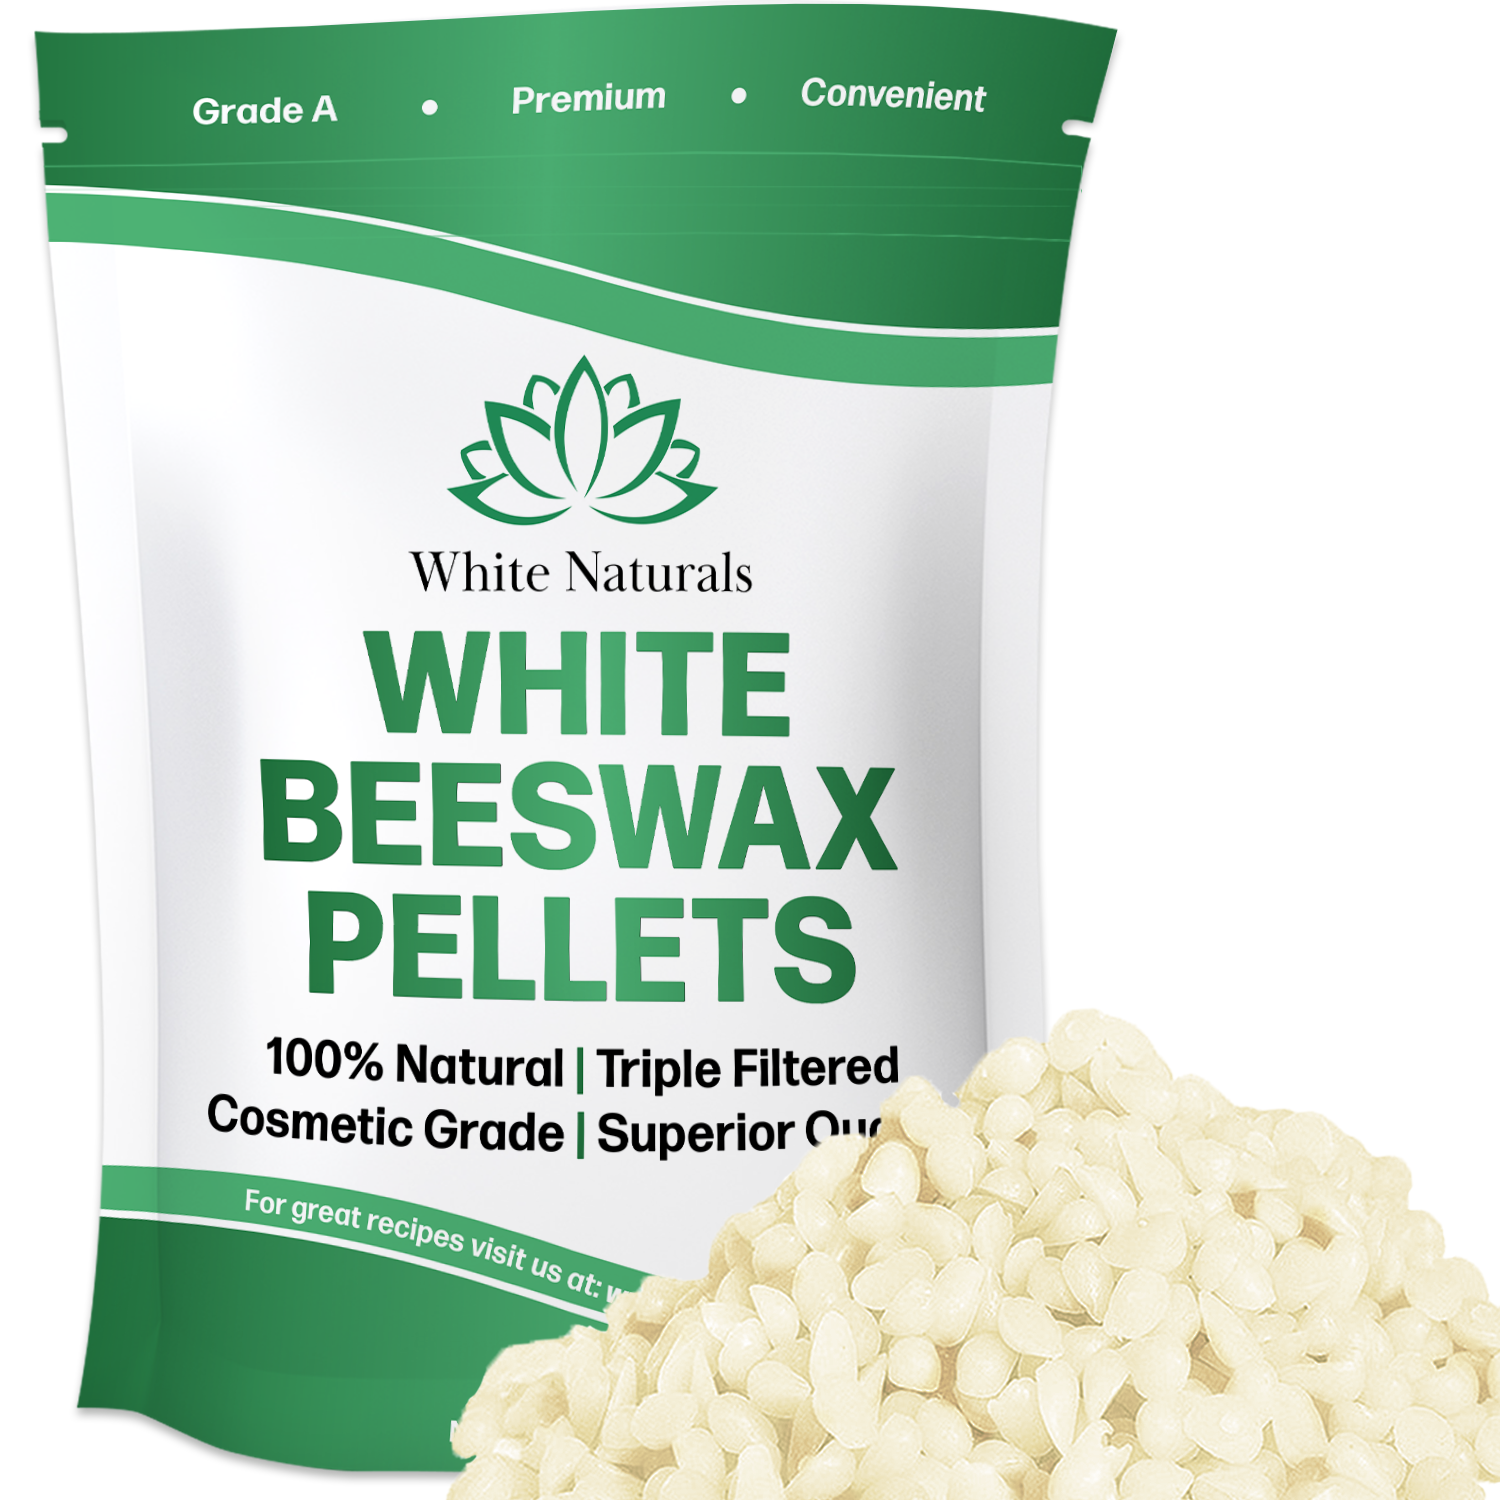 White Beeswax Pellets 16oz (1lb), Pure, Organic, Cosmetic Grade, Triple  Filtered, Great For Diy Lip Balms, Lotions, Candles & more - White Naturals